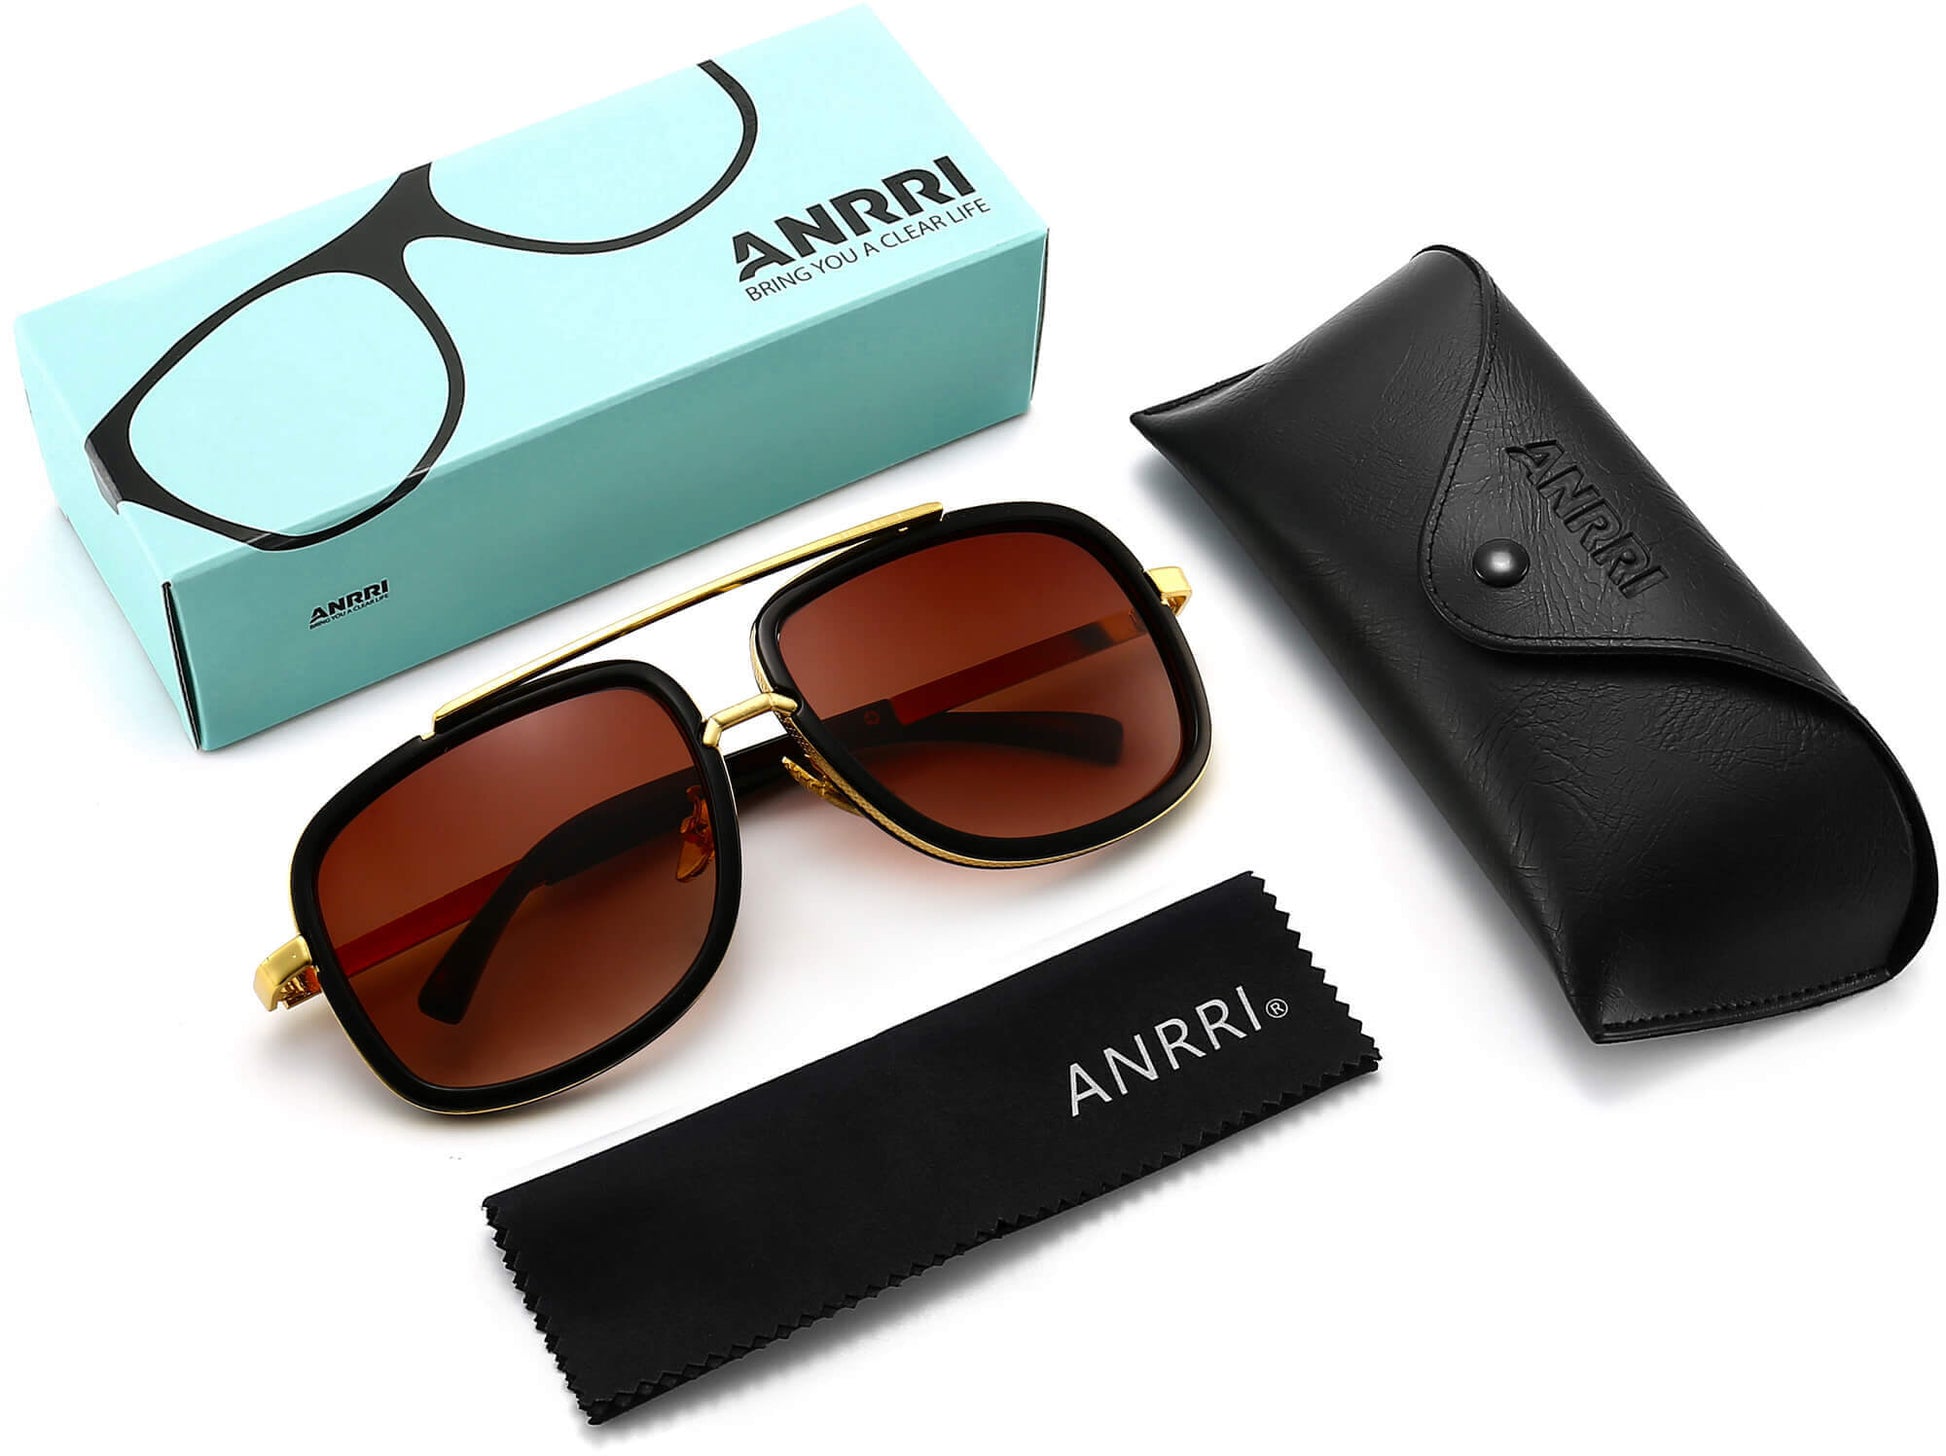 Gael Black Plastic Sunglasses with Accessories from ANRRI